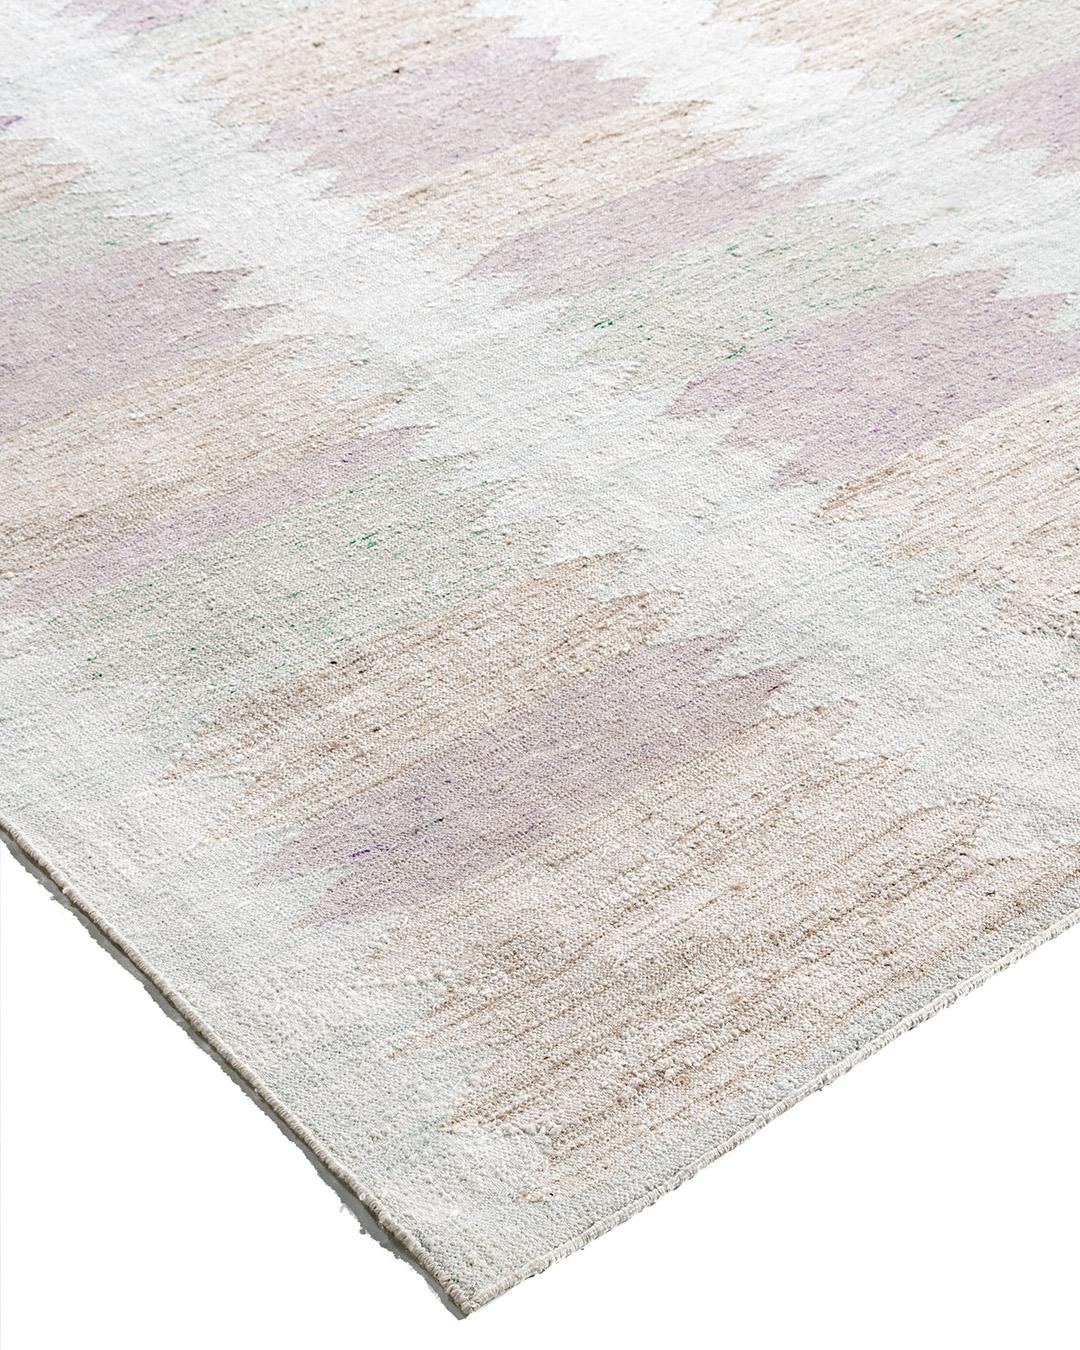 Scandinavian Swedish Style Flatweave  Deco rug, 8' x 10'. Handwoven in India using a combination of wool and viscose this Kilim has been styled on the clean and simple look of Swedish designs to create a rug that has a simplicity and boldness that